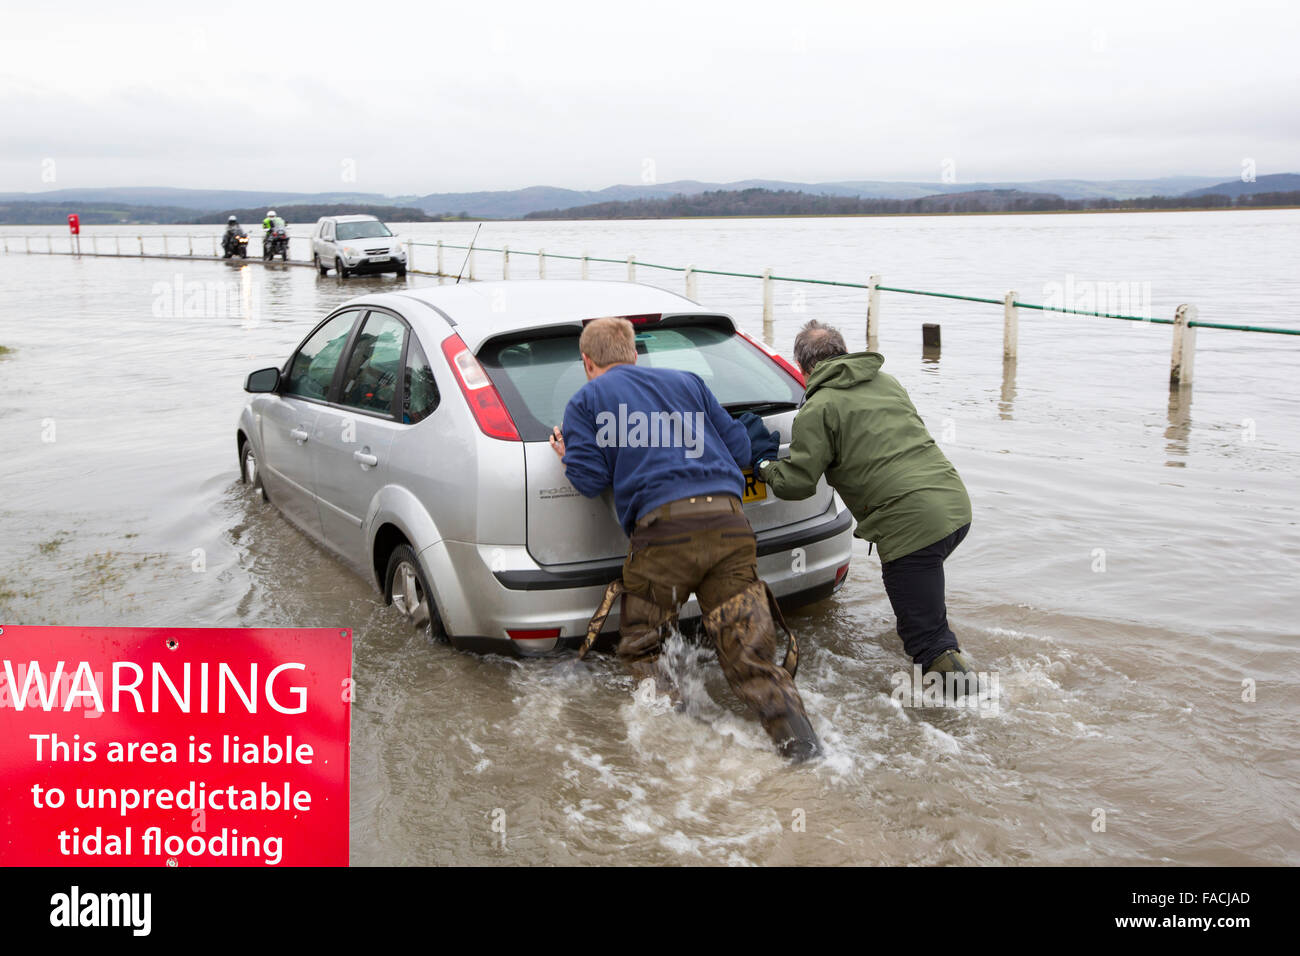 A motorist stuck in flood waters on the road at Storth on the Kent Estuary in Cumbria, UK, during the January 2014 storm surge and high tides, is pushed out by two helpers. Stock Photo